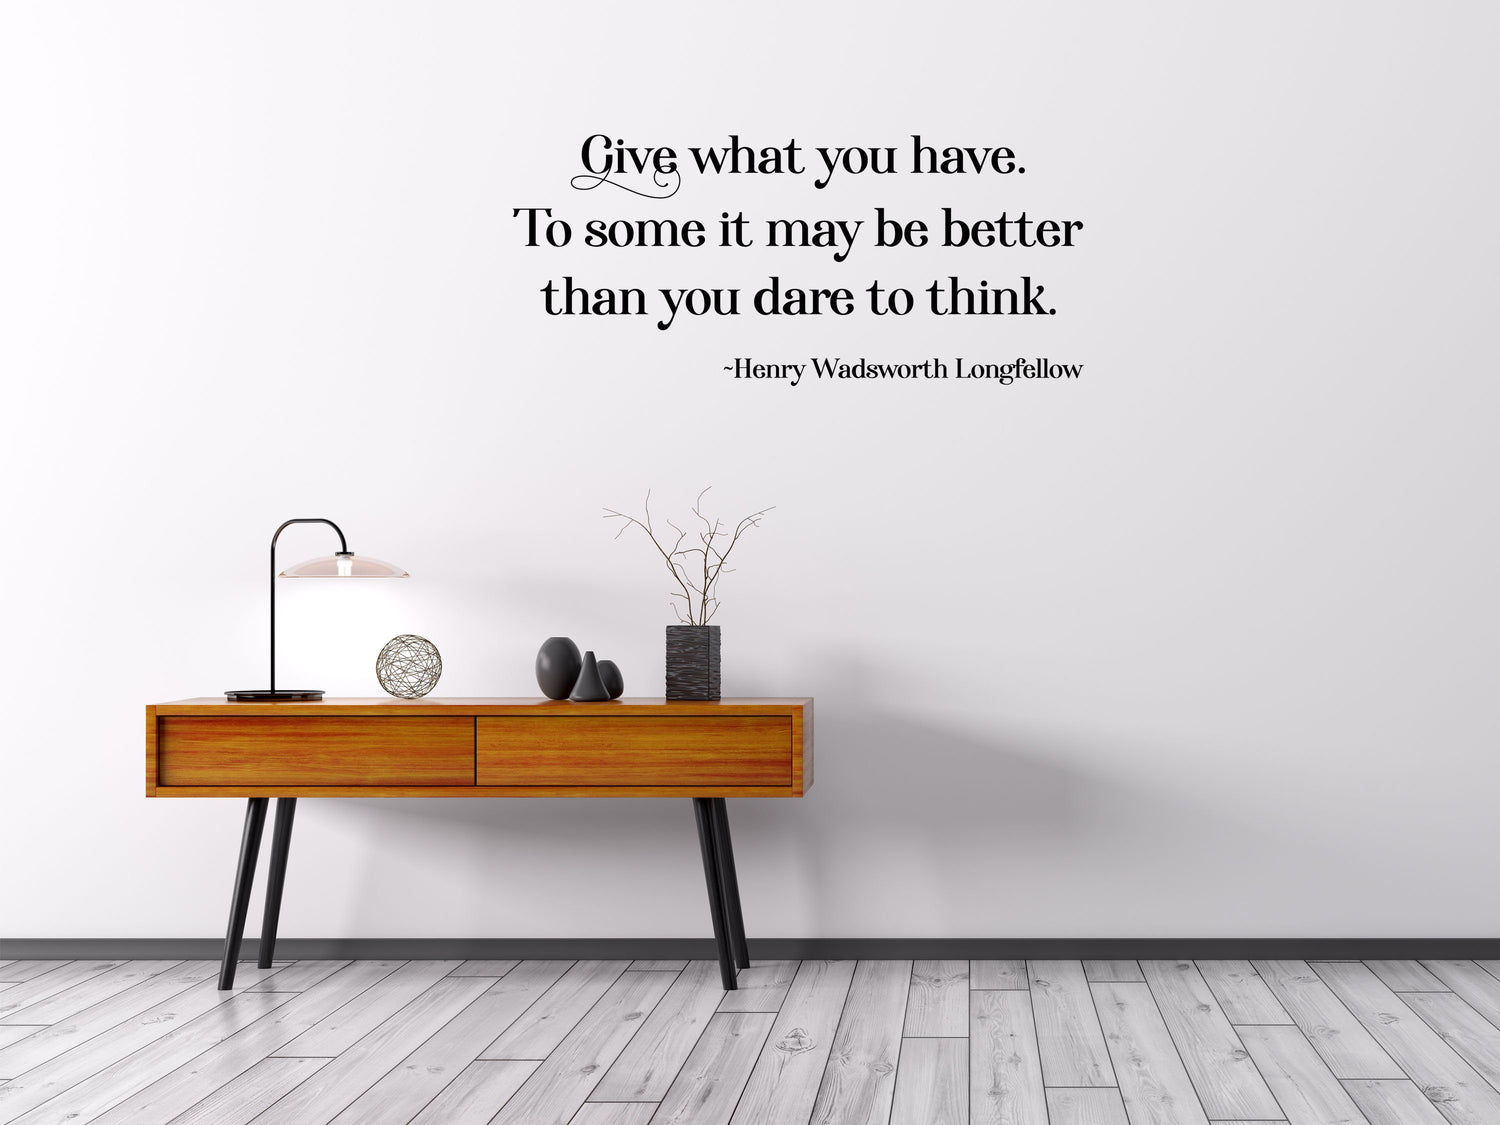 Longfellow Wall Decal - Longfellow Wall Sticker Quote - Henry Wadsworth Decal - Henry Wadsworth Longfellow Sign - Give What You Have Wall Done 